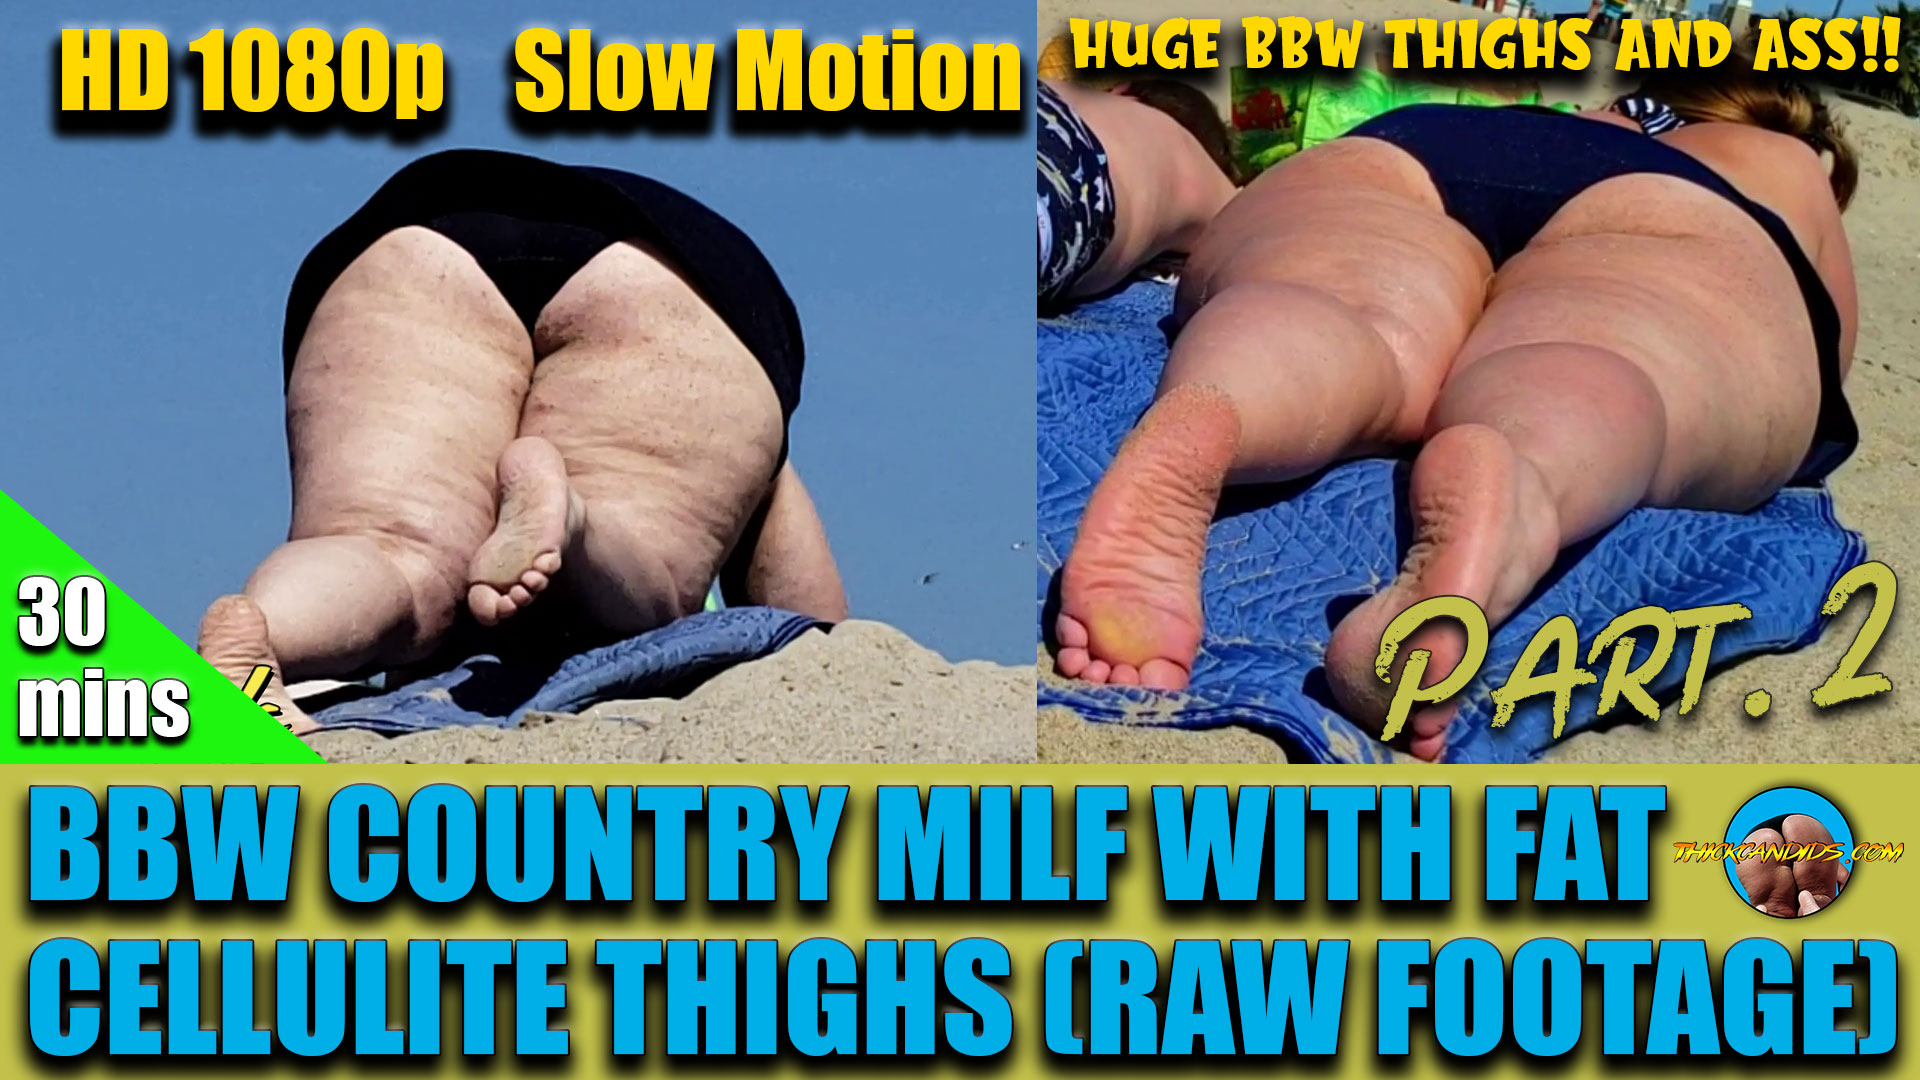 BBW-COUNTRY-MILF-WITH-FAT-CELLULITE-THIGHS-(30mins)-(RAW-FOOTAGE)-Part.-2